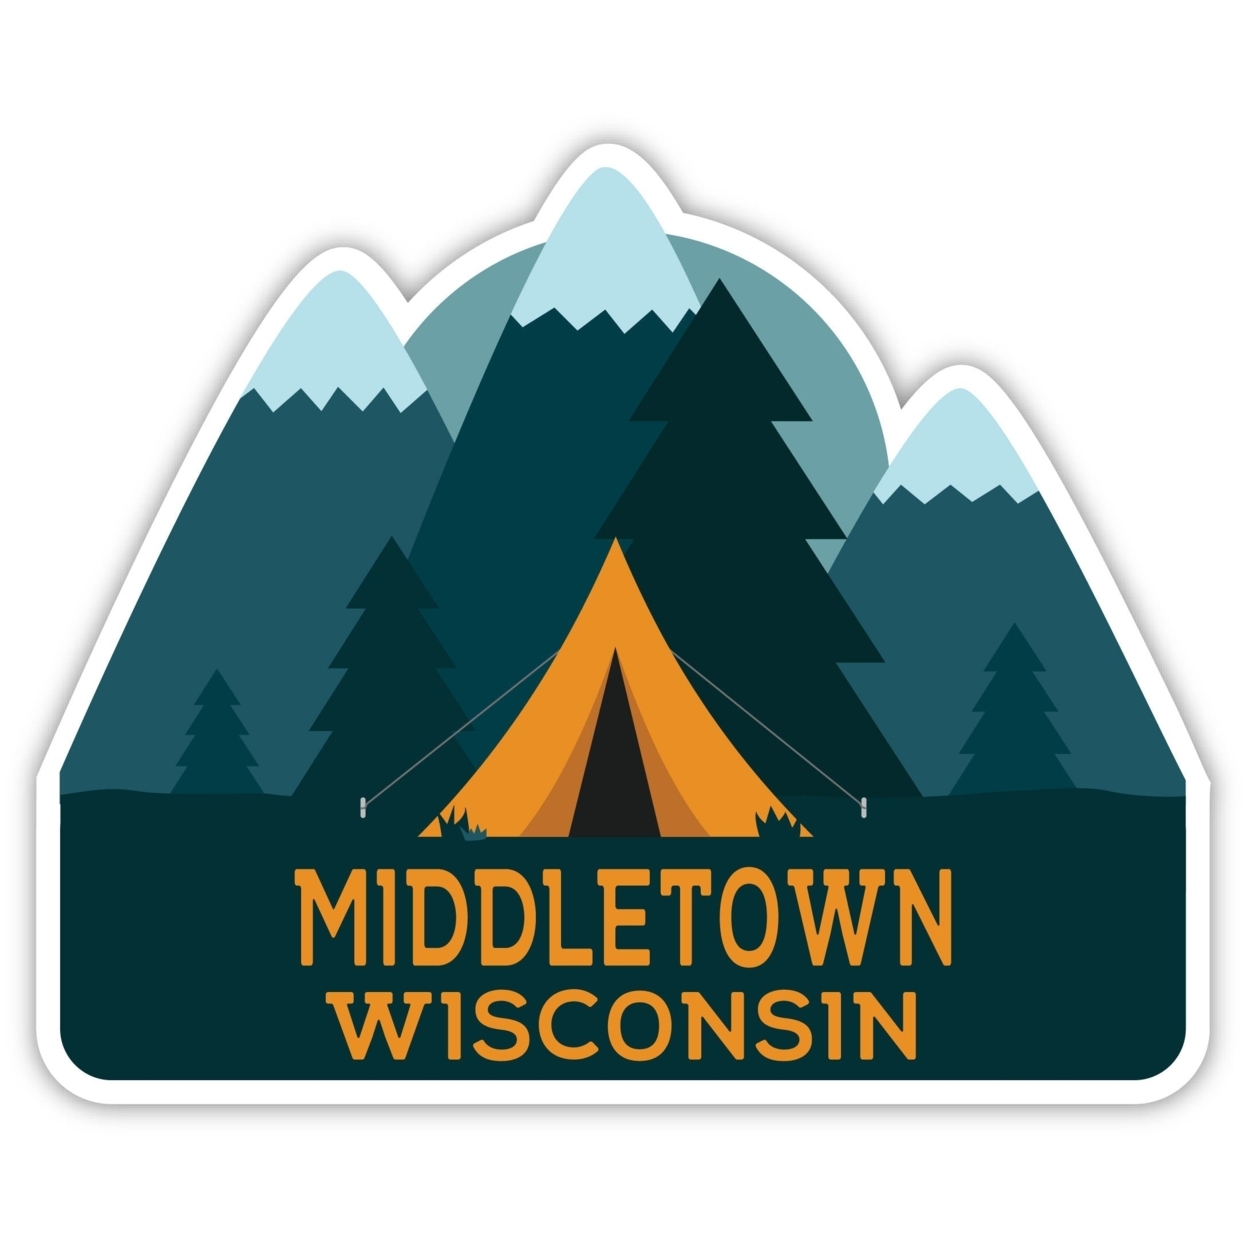 Middletown Wisconsin Souvenir Decorative Stickers (Choose Theme And Size) - 4-Inch, Tent